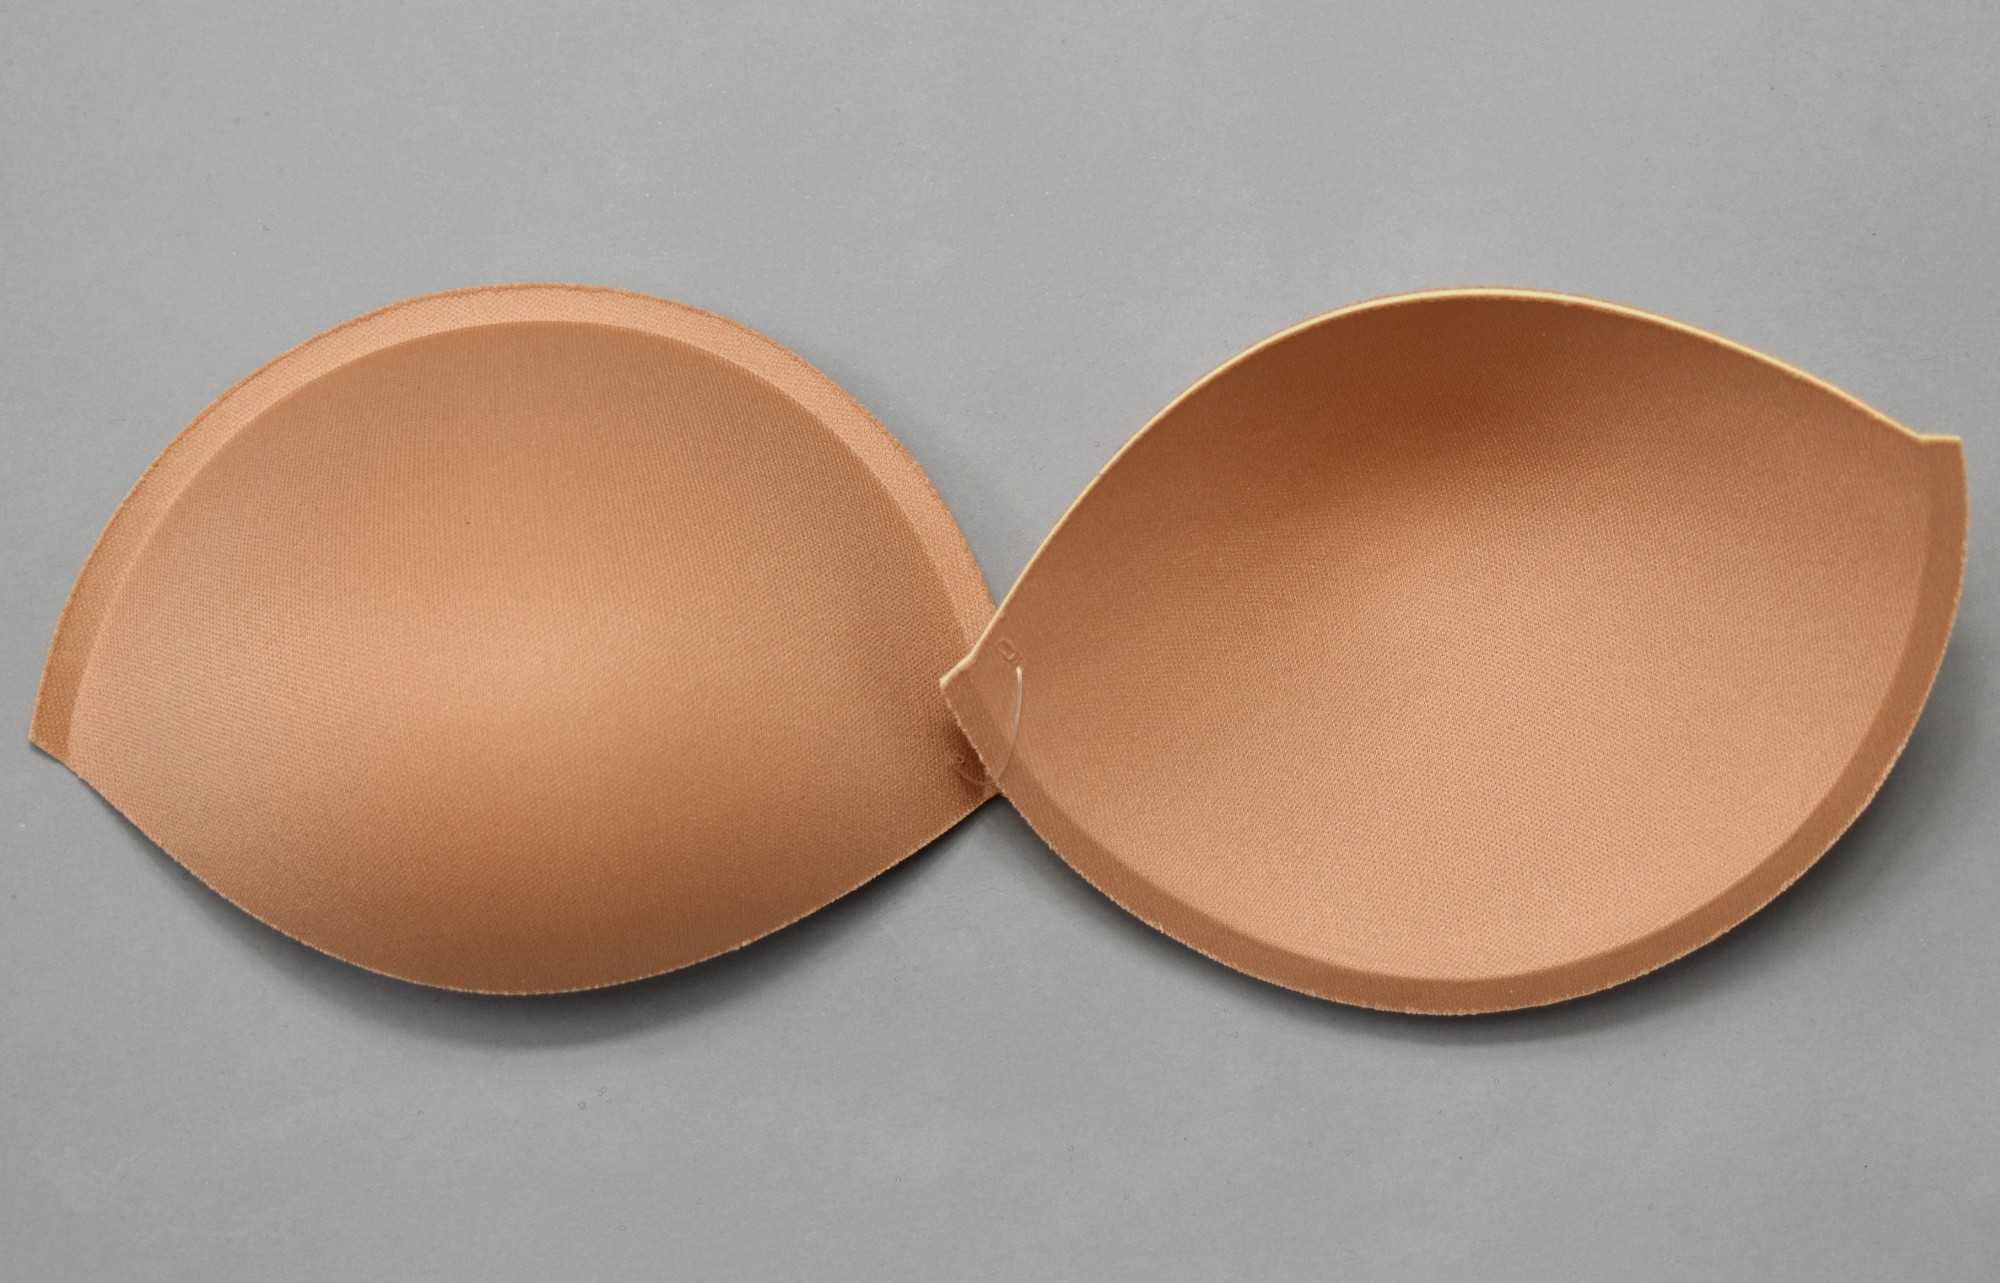 Ubras one-size bra ( fits for cup A-C / 50-65KG ), 4 colors